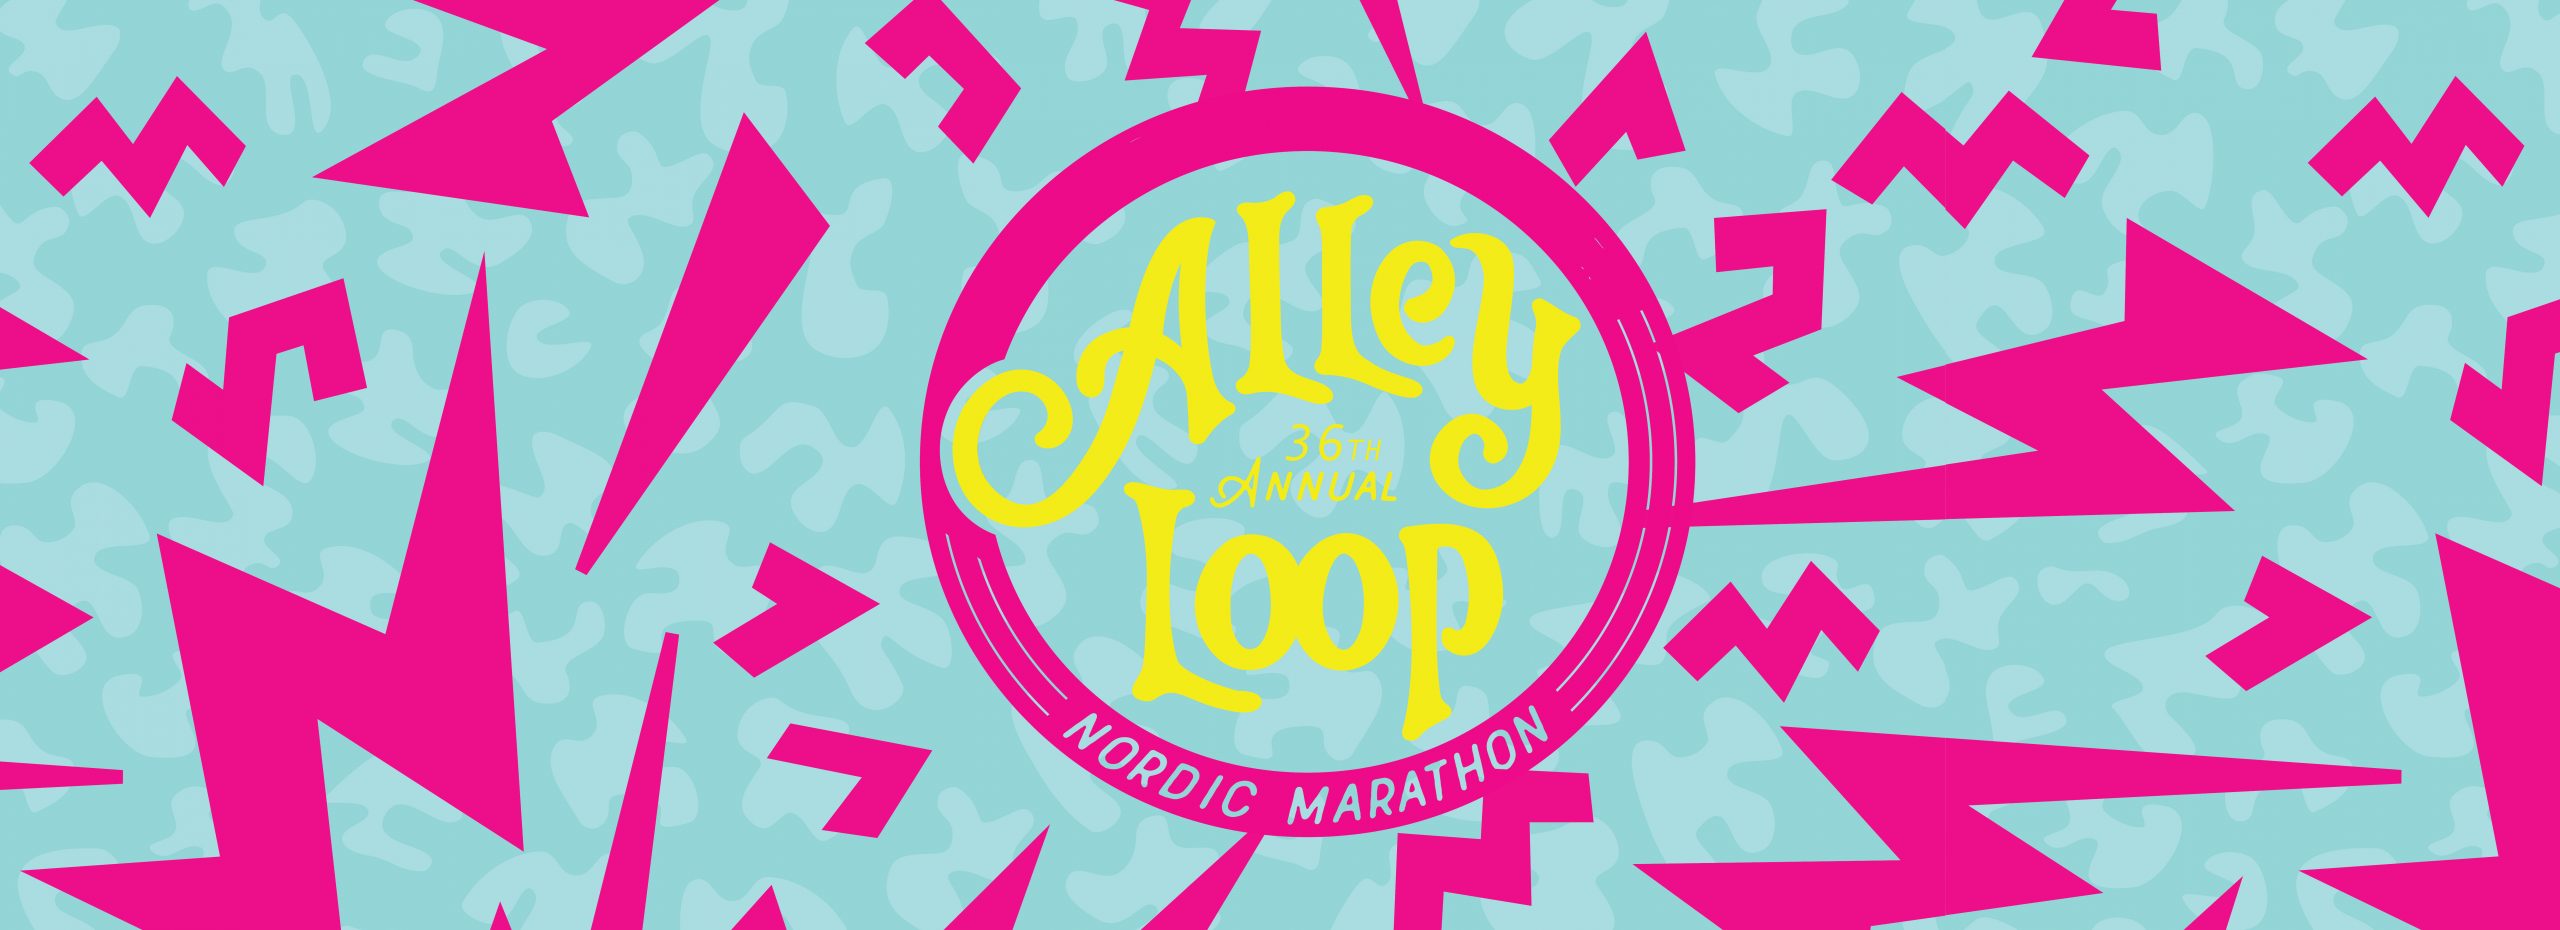 2022 Alley Loop logo and colors